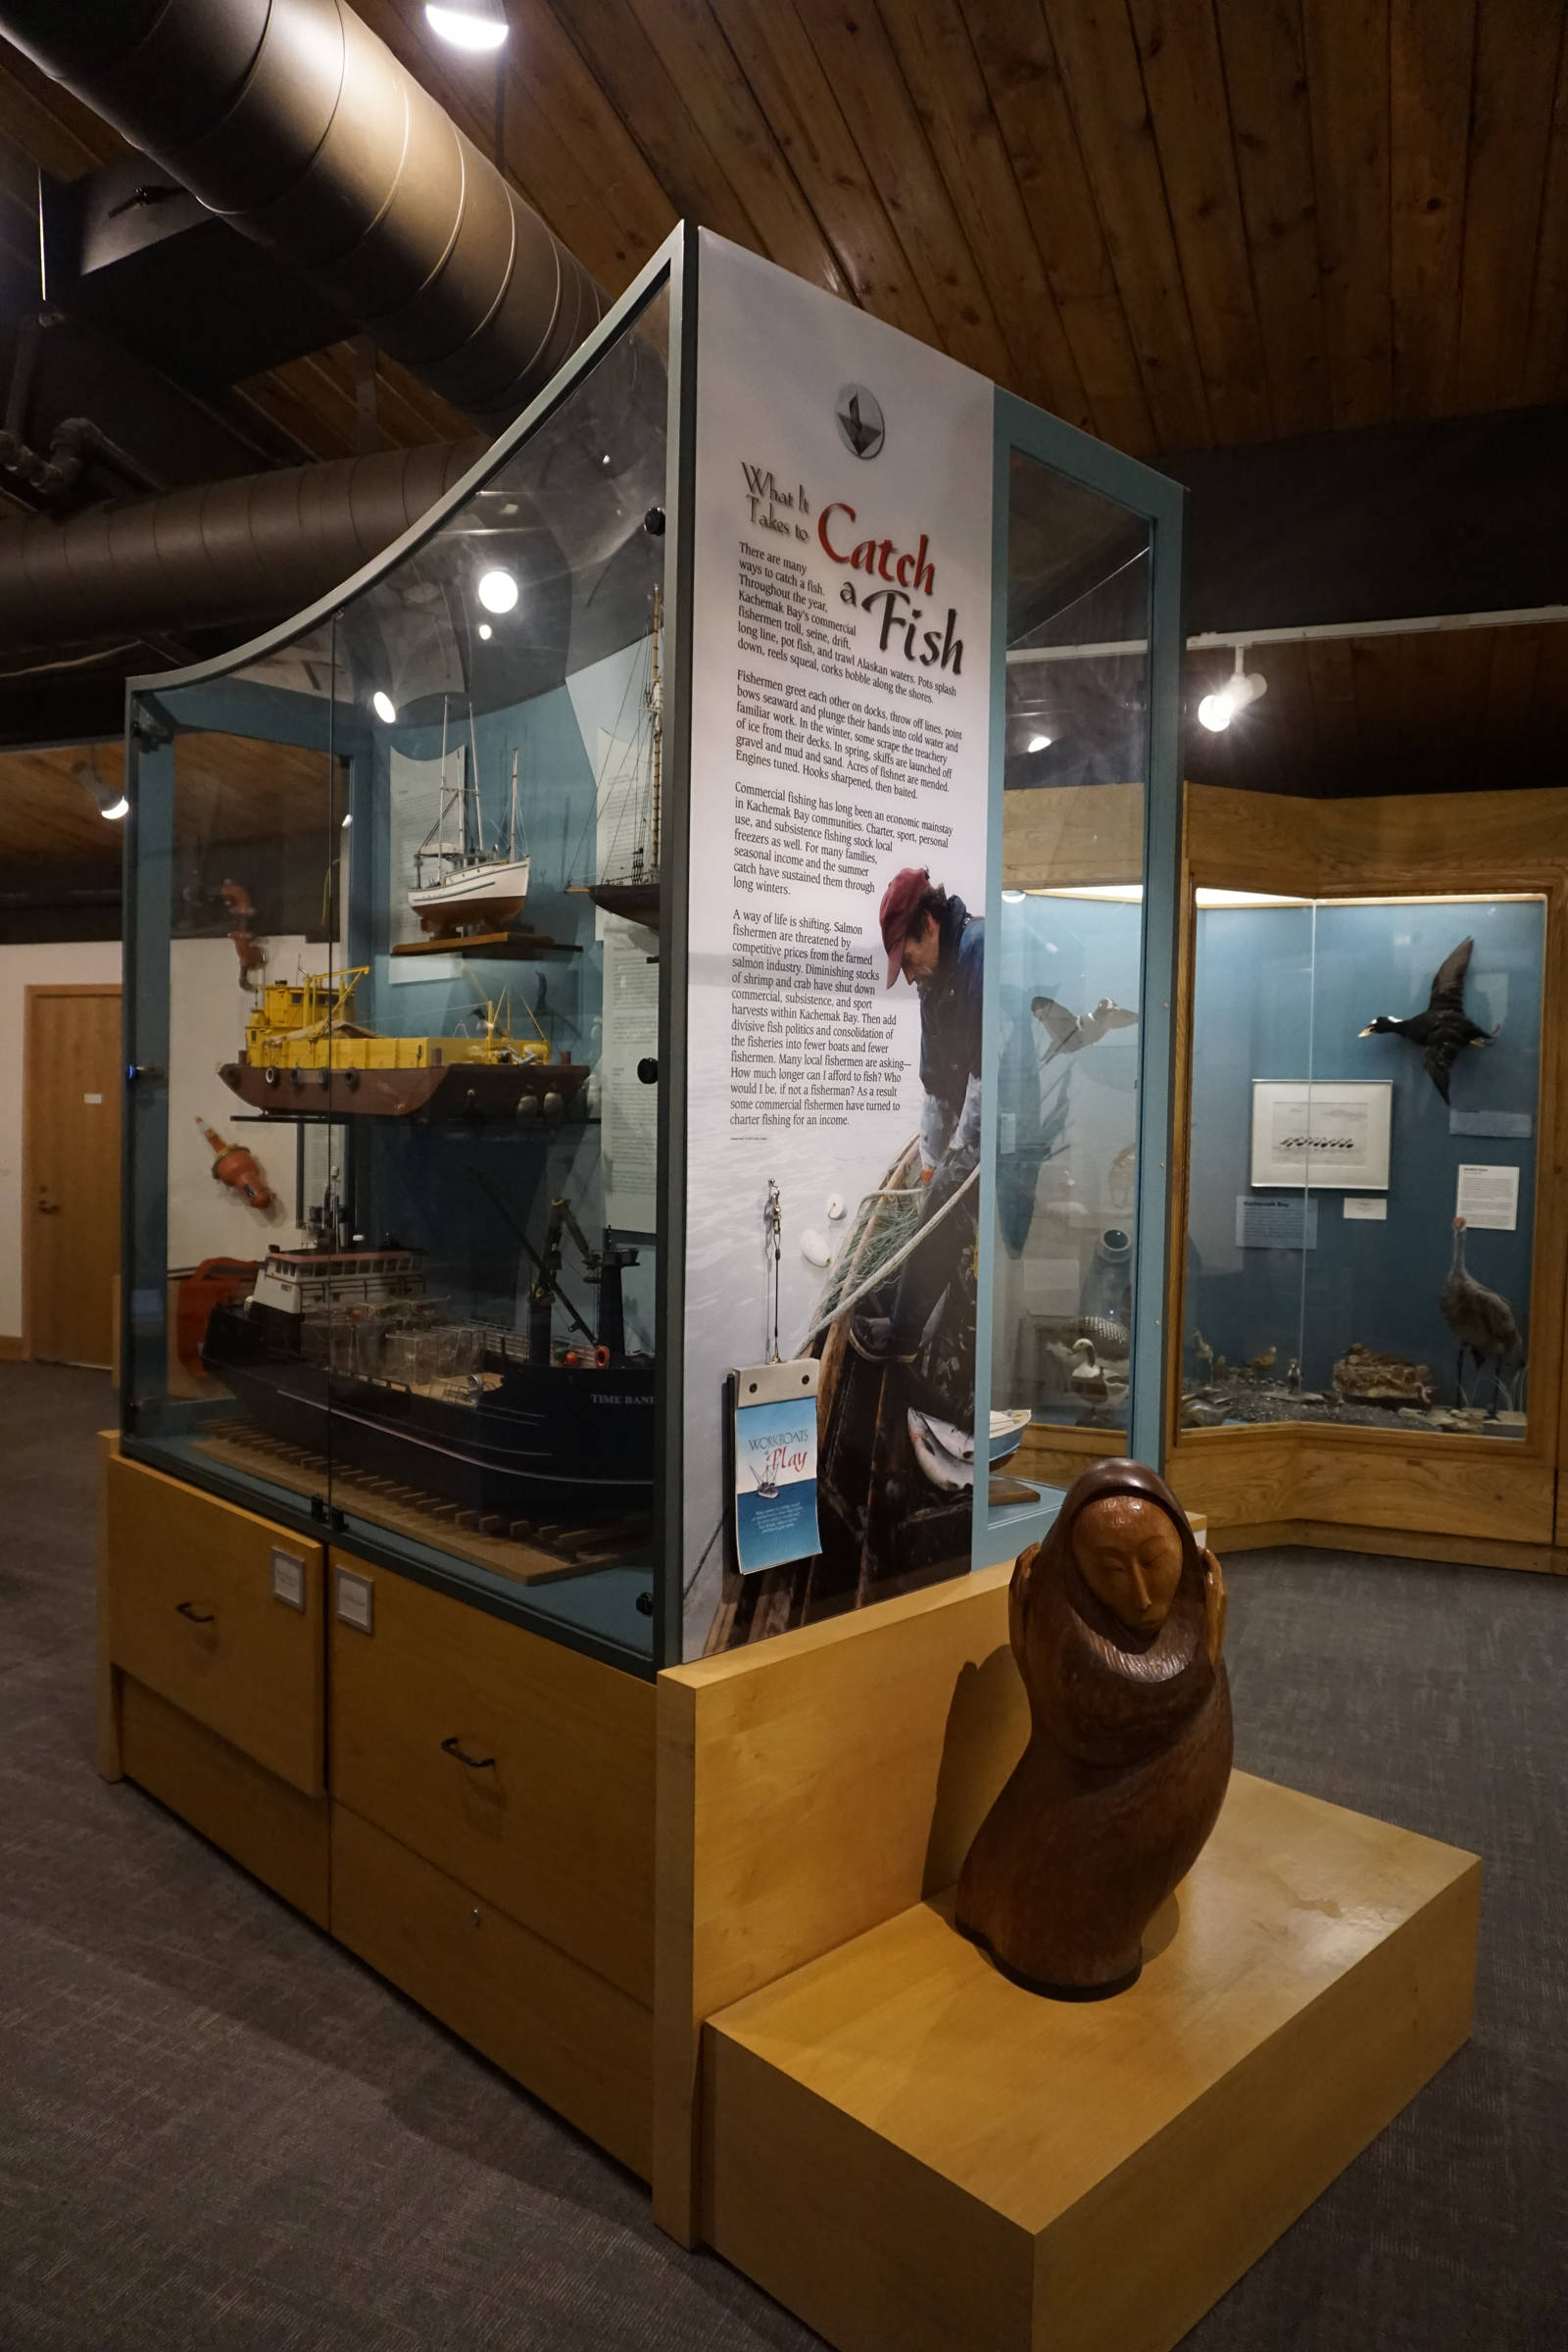 Some exhibits, such as a display that includes Don Ronda’s boat models, have been moved from the main gallery to the Marine Gallery as part of the Pratt Museum’s remodel, as seen here on May 28,2019, in Homer, Alaska. (Photo by Michael Armstrong/Homer News)